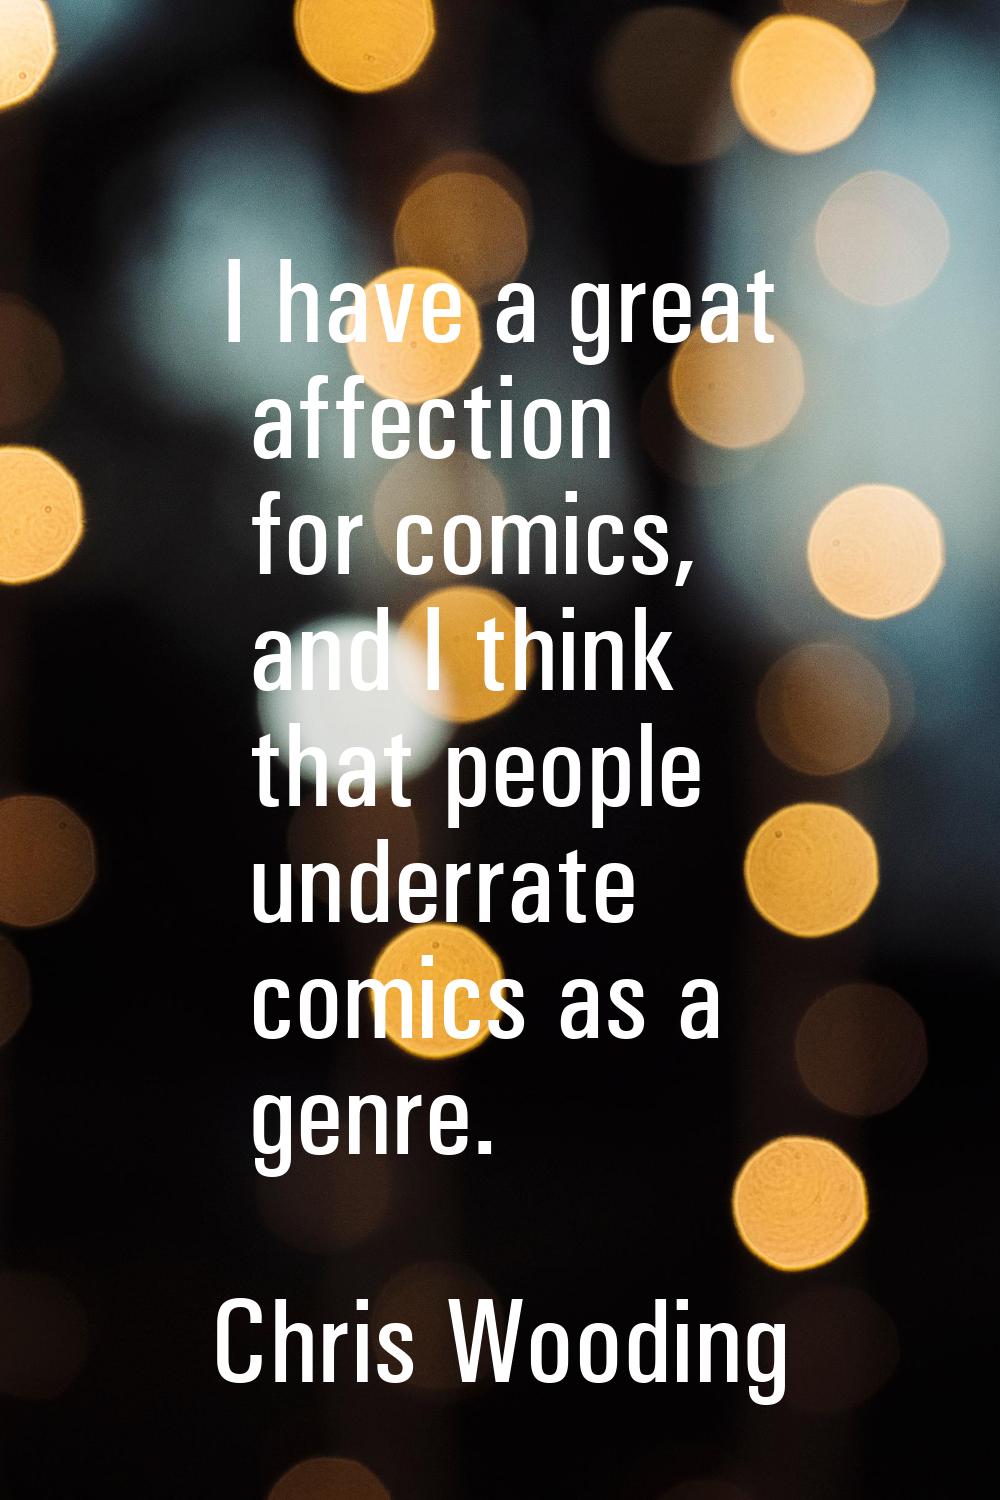 I have a great affection for comics, and I think that people underrate comics as a genre.